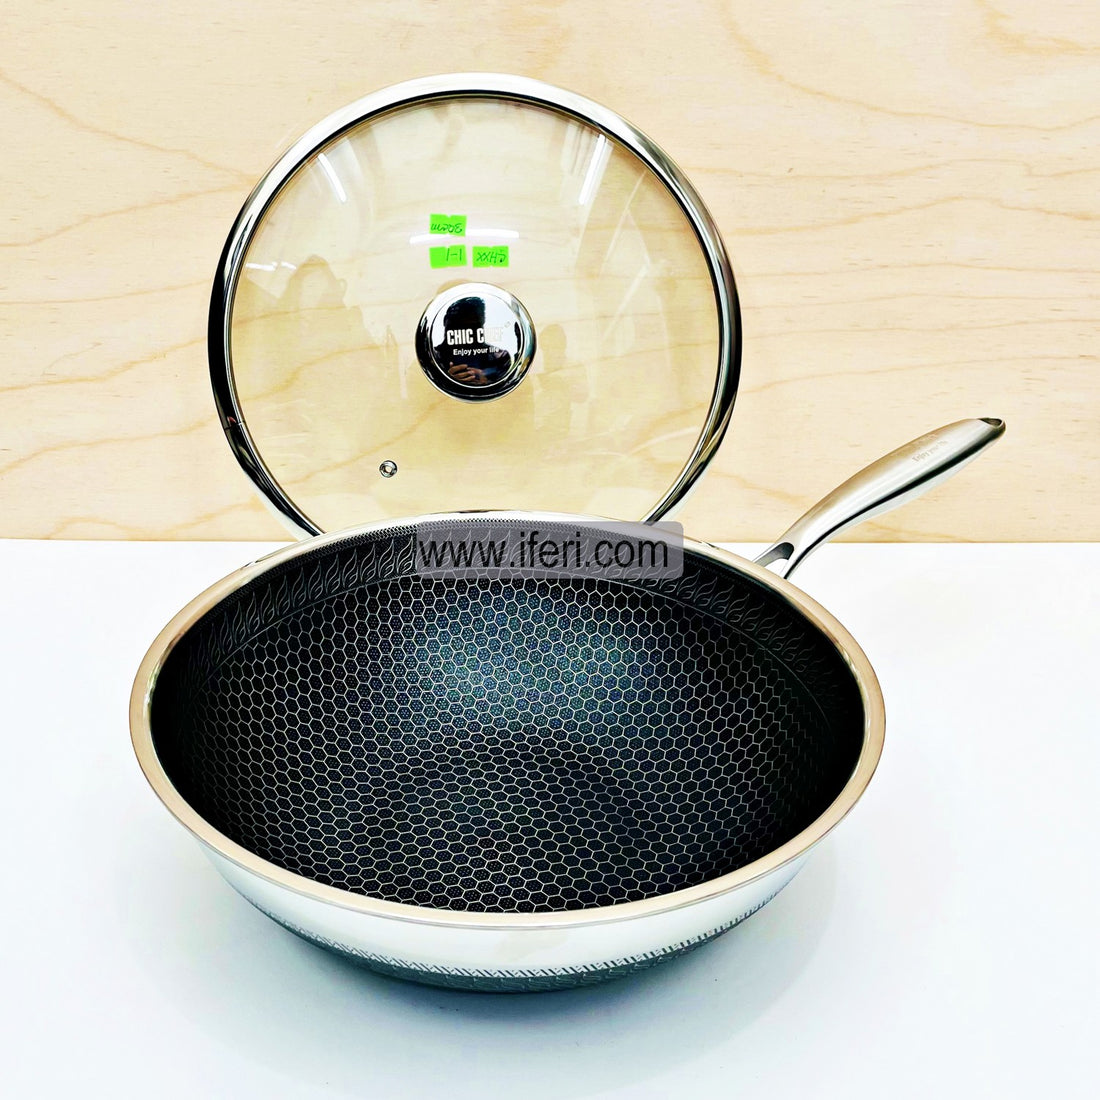 30 cm Stainless Steel Non-Stick Honeycomb Wok Pan With Glass Lid RY4680